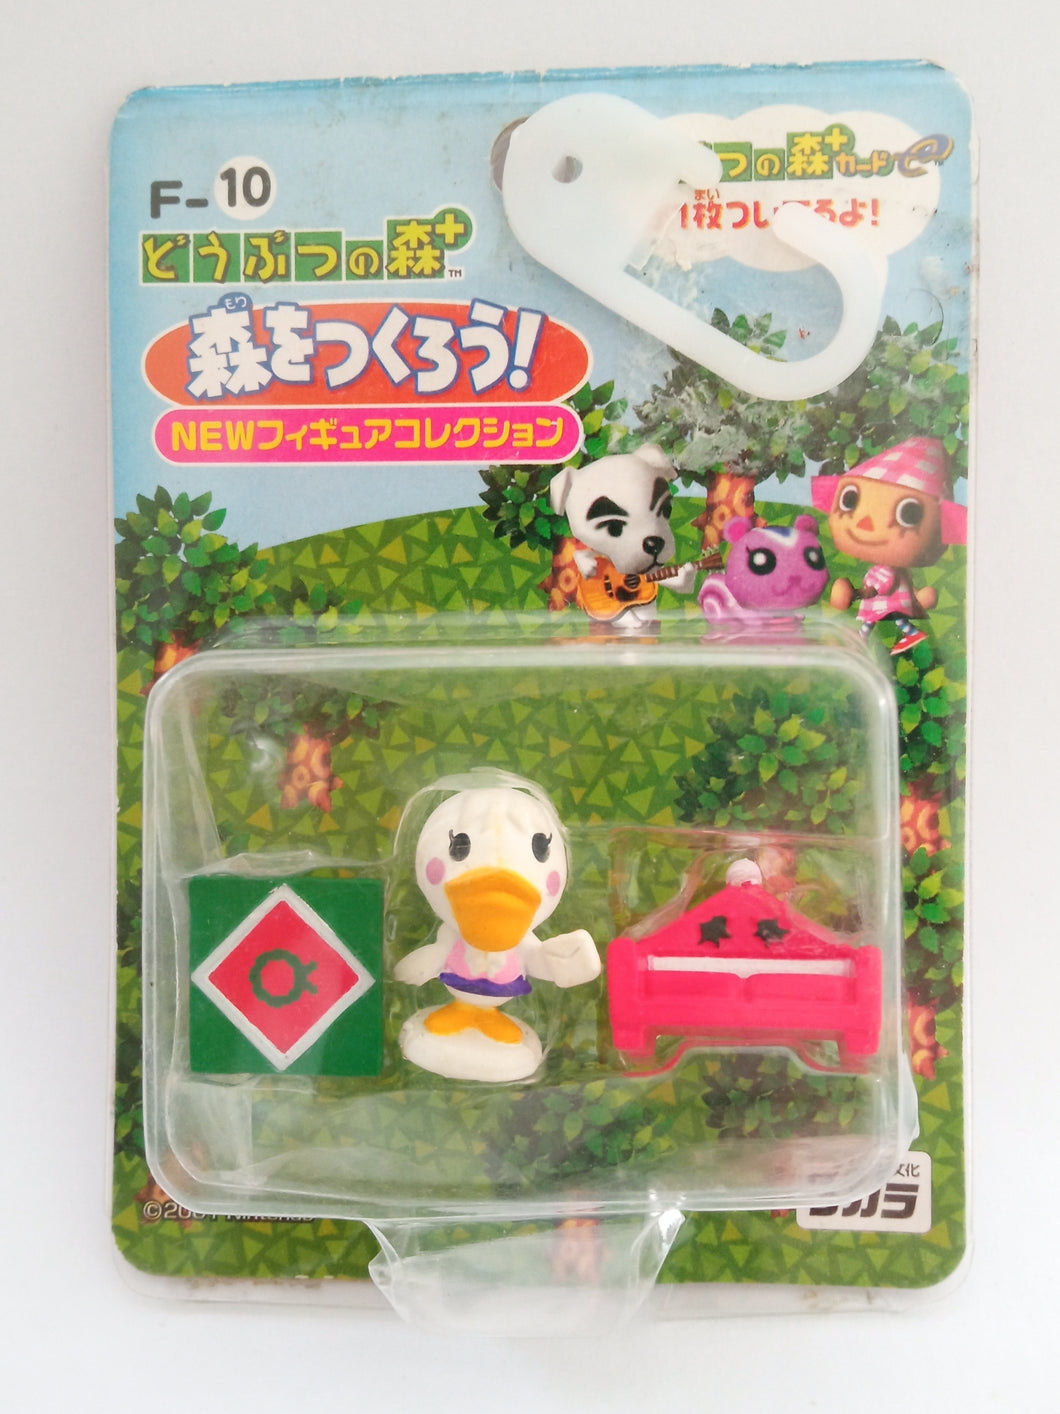 Animal Crossing F-10 Let's Make a Forest Mini Figure